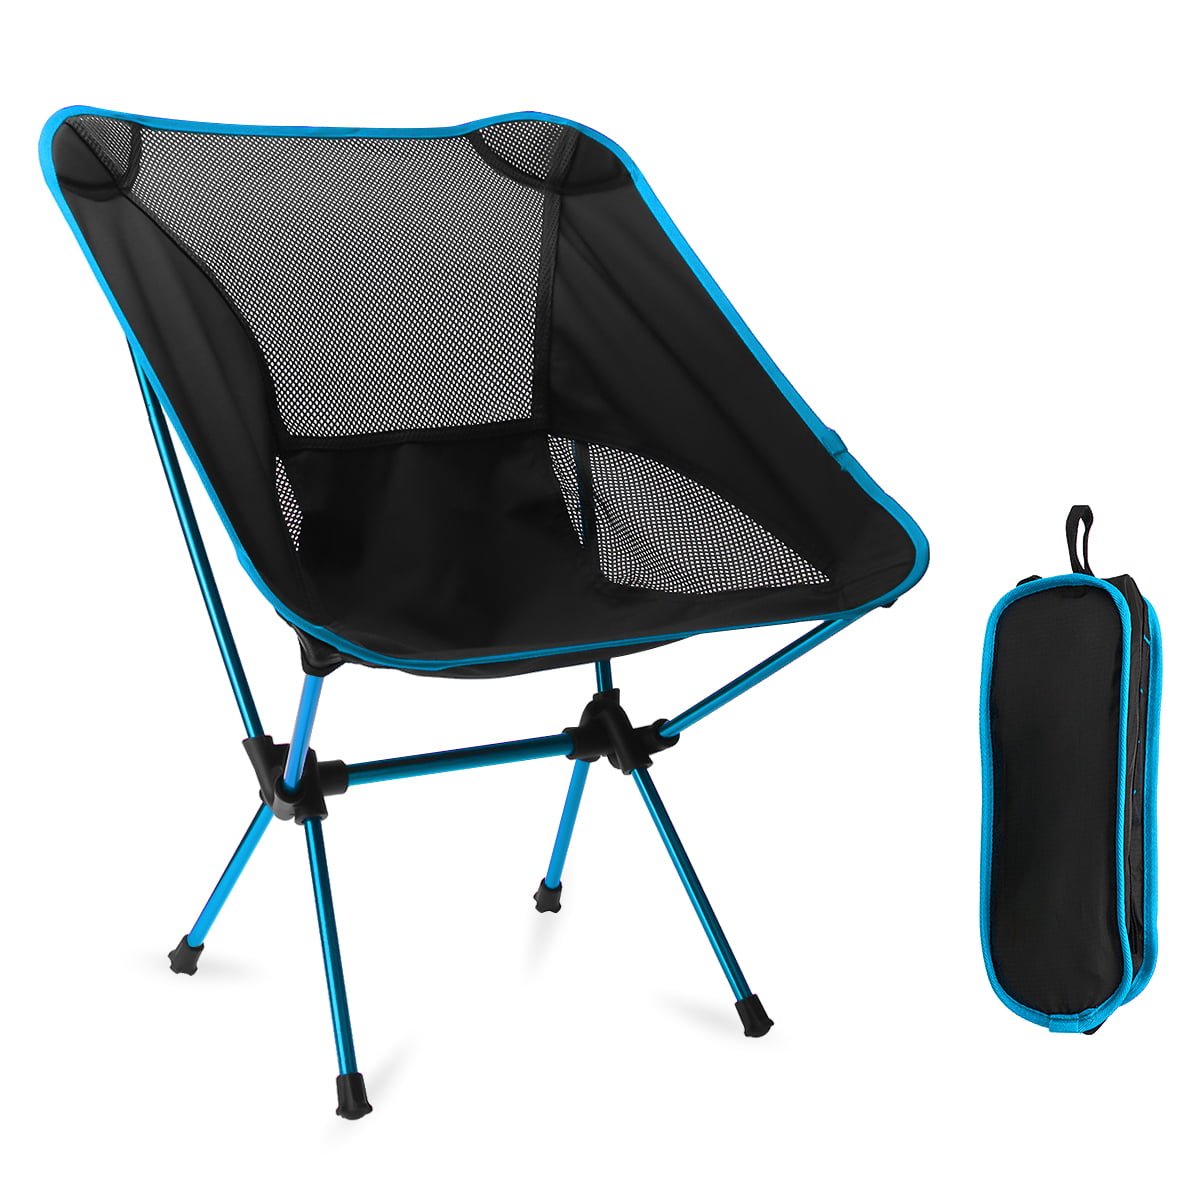 DSFSAEG Portable Camping Chair Compact Ultralight Folding Backpacking Chairs Camp Foldable Lightweight Backpack Chair in a Bag for Outdoor Picnic Hiking